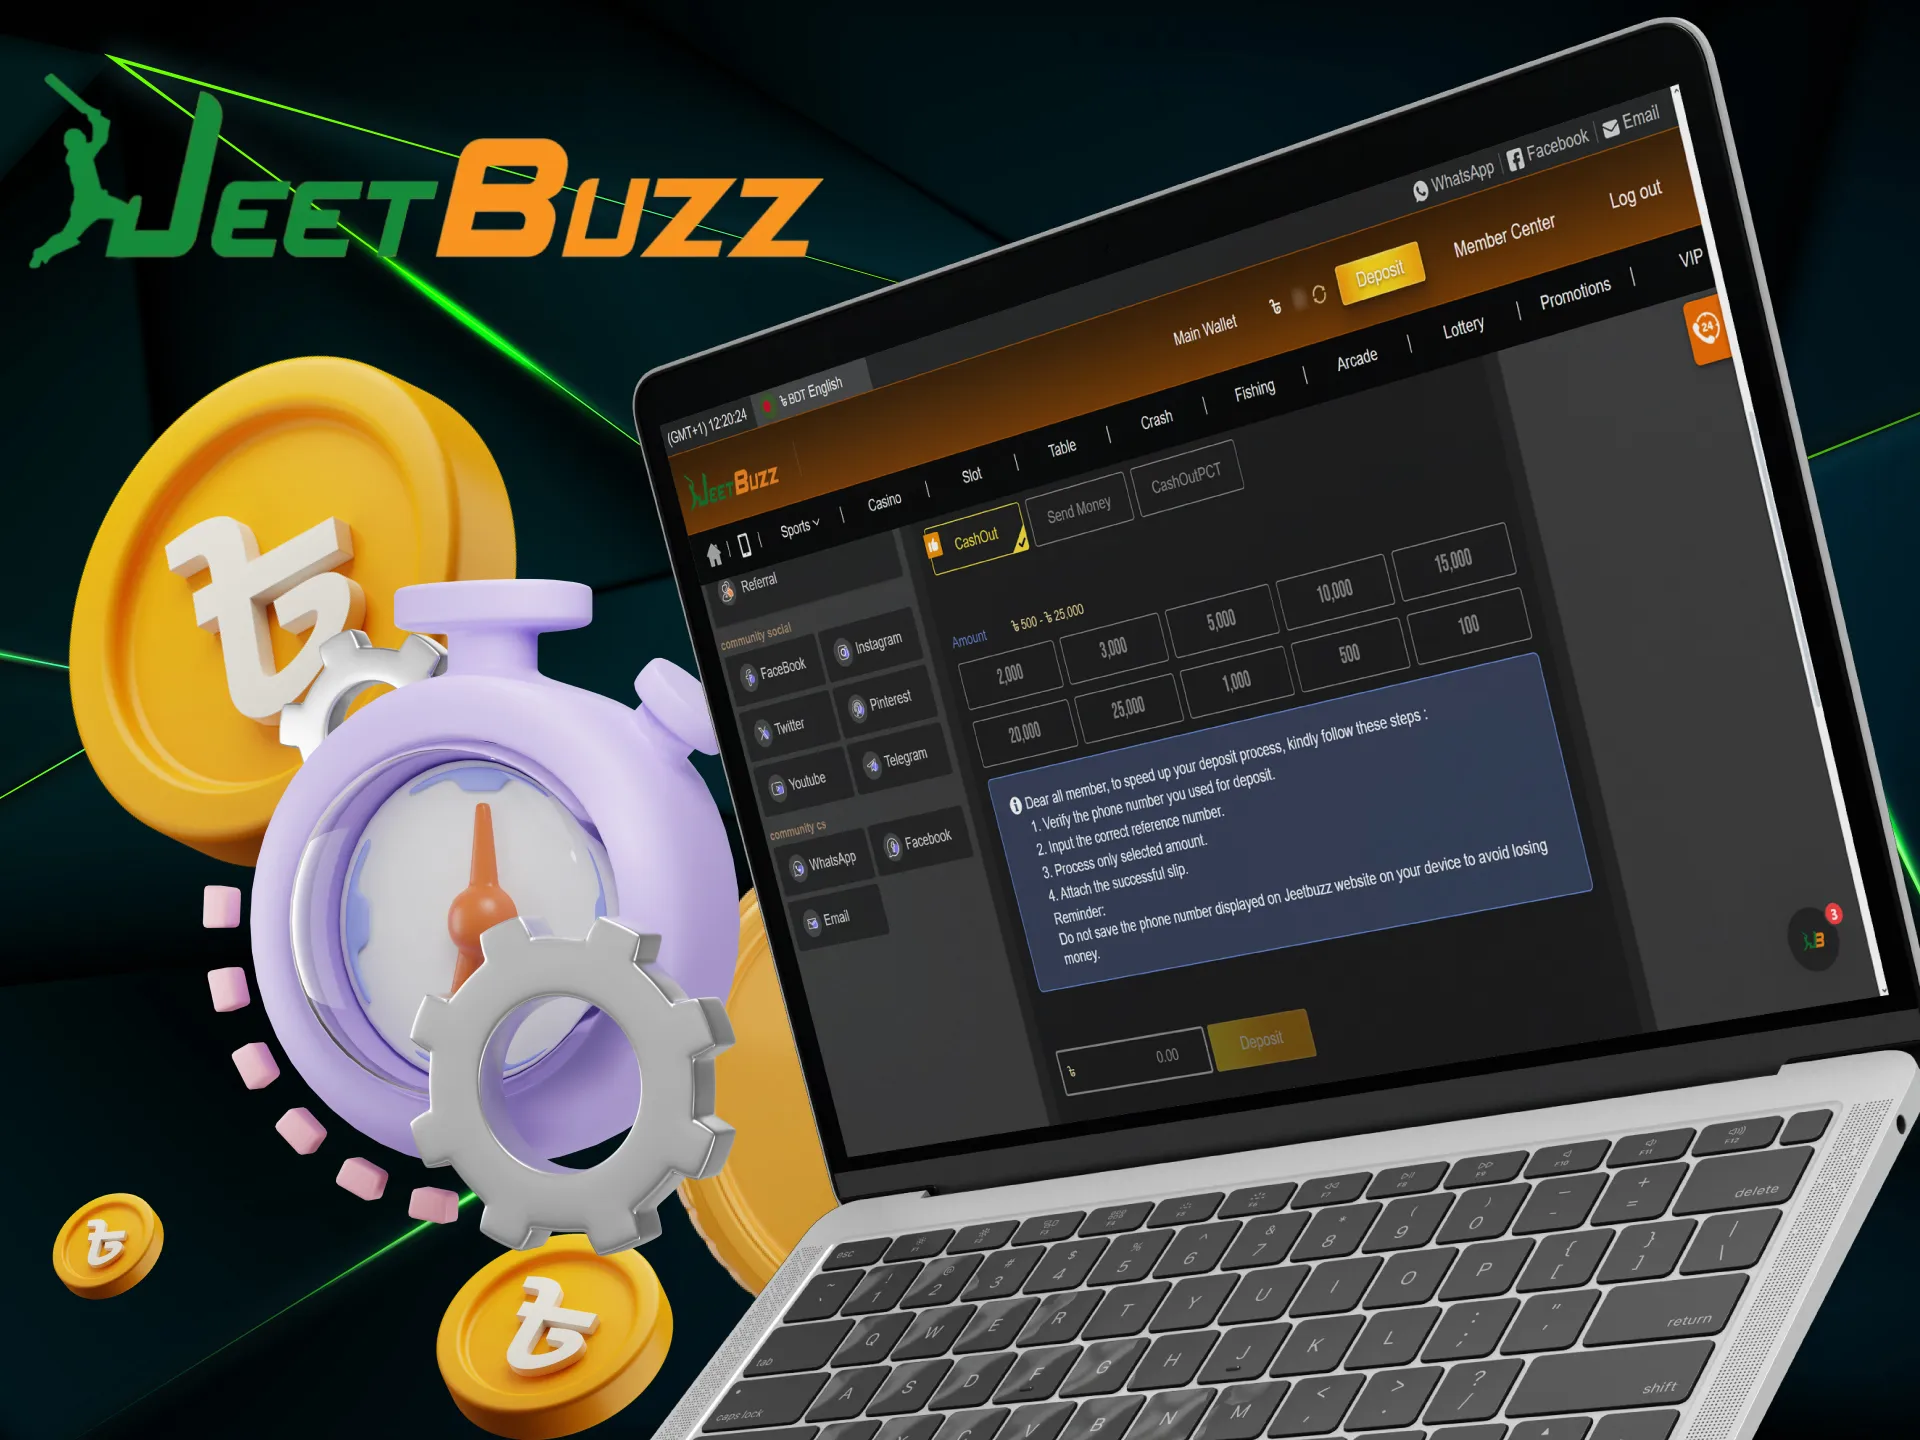 Deposits at JeetBuzz are processed instantly.